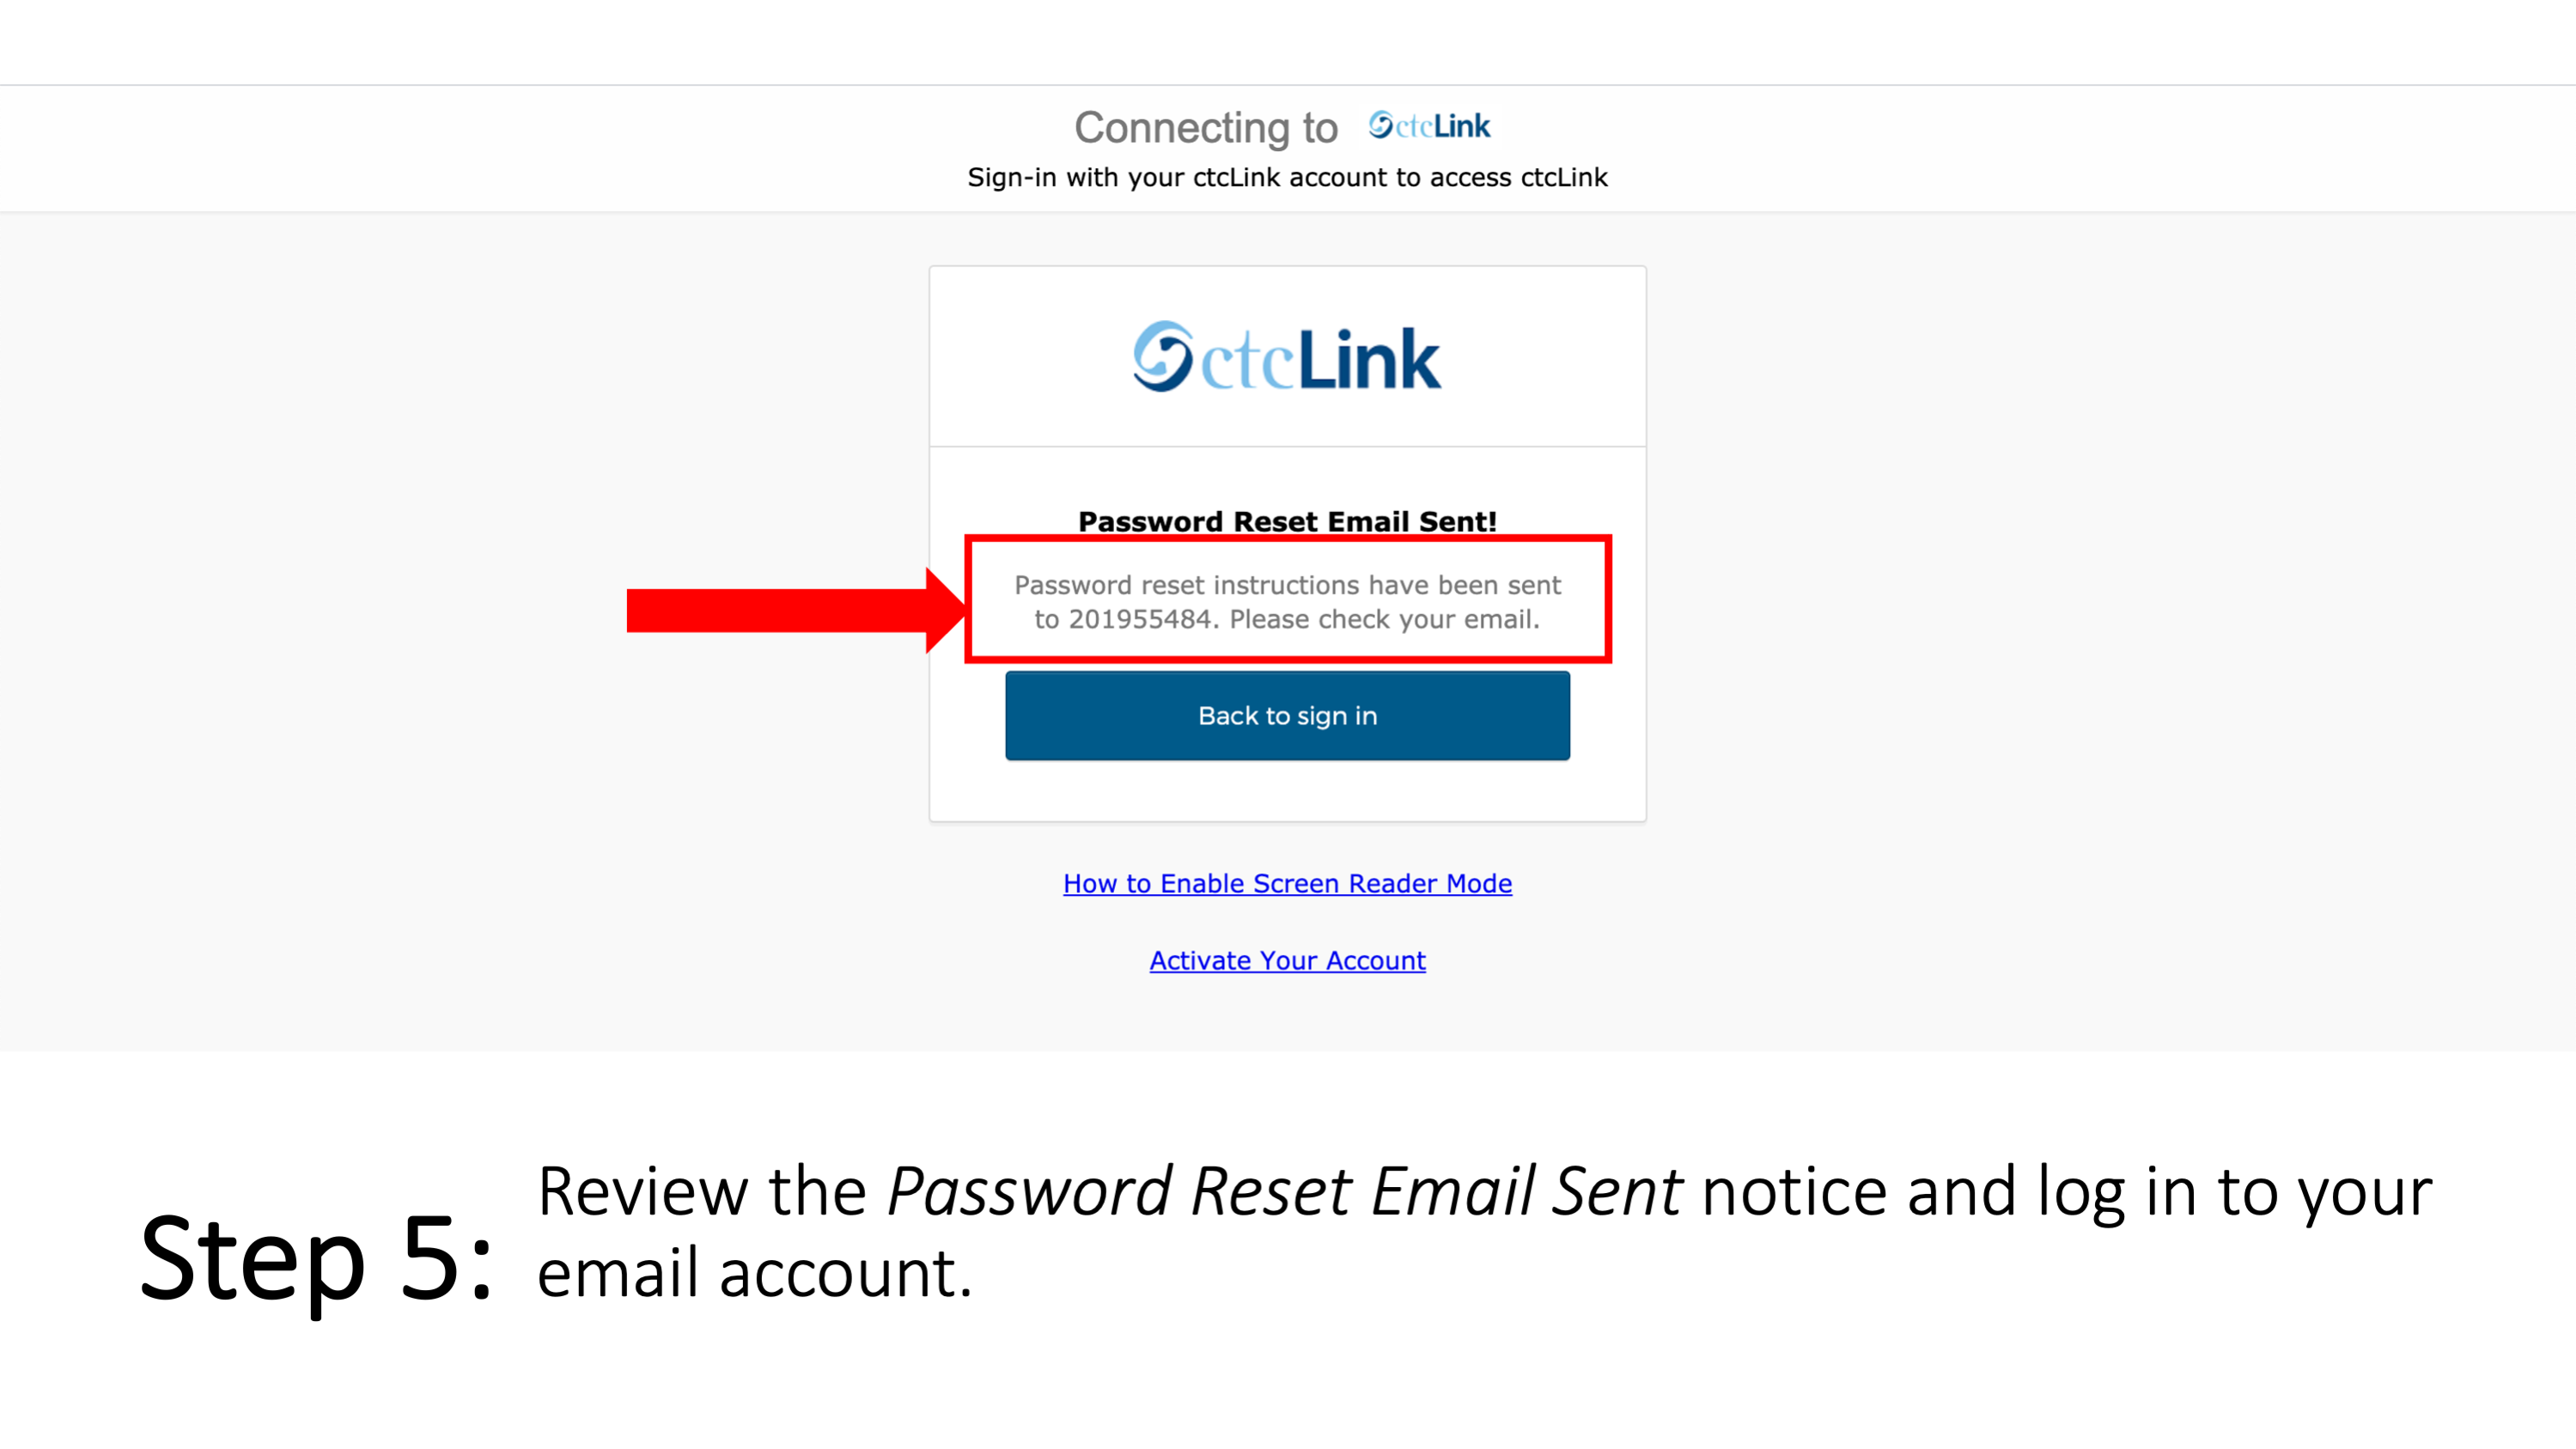 Step 5: Review the Password Reset Email Sent notice and log in to your email account.